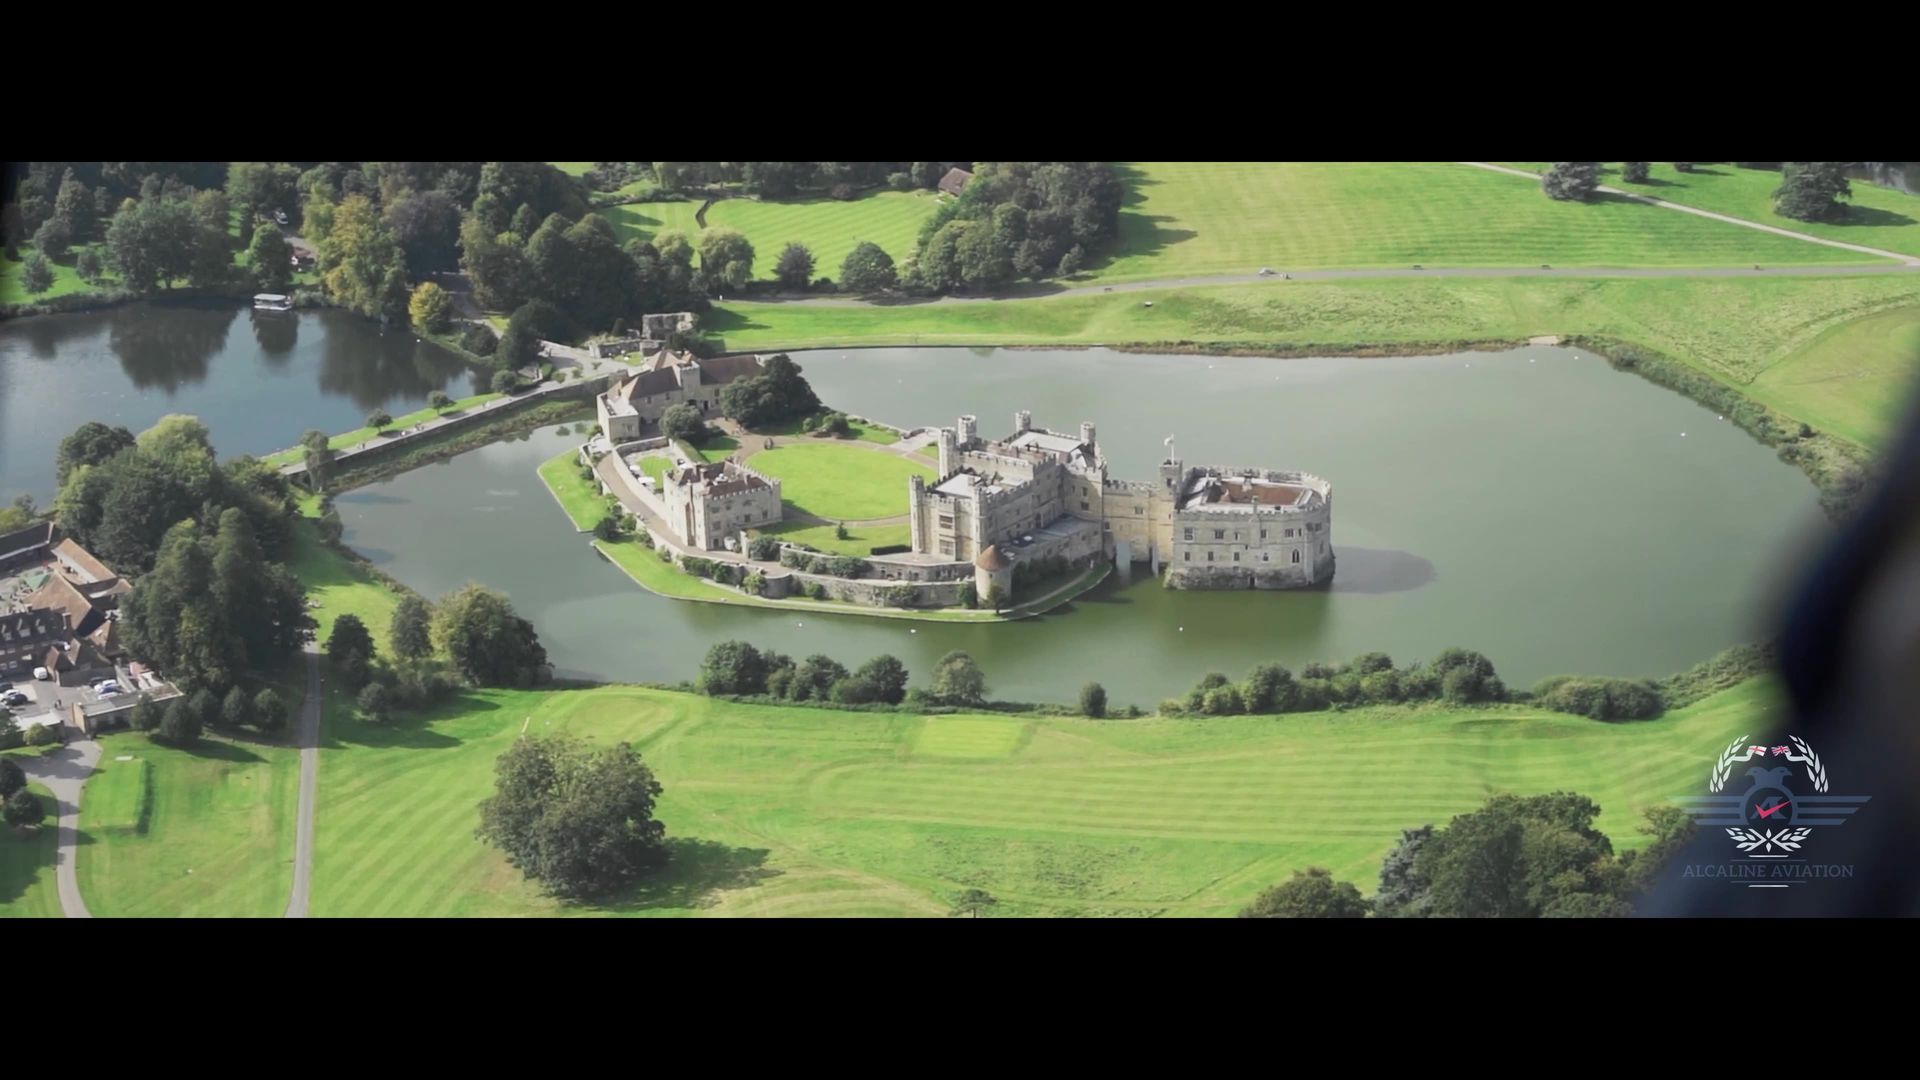 An aerial view of a castle on a small island in the middle of a lake surrounded by trees.